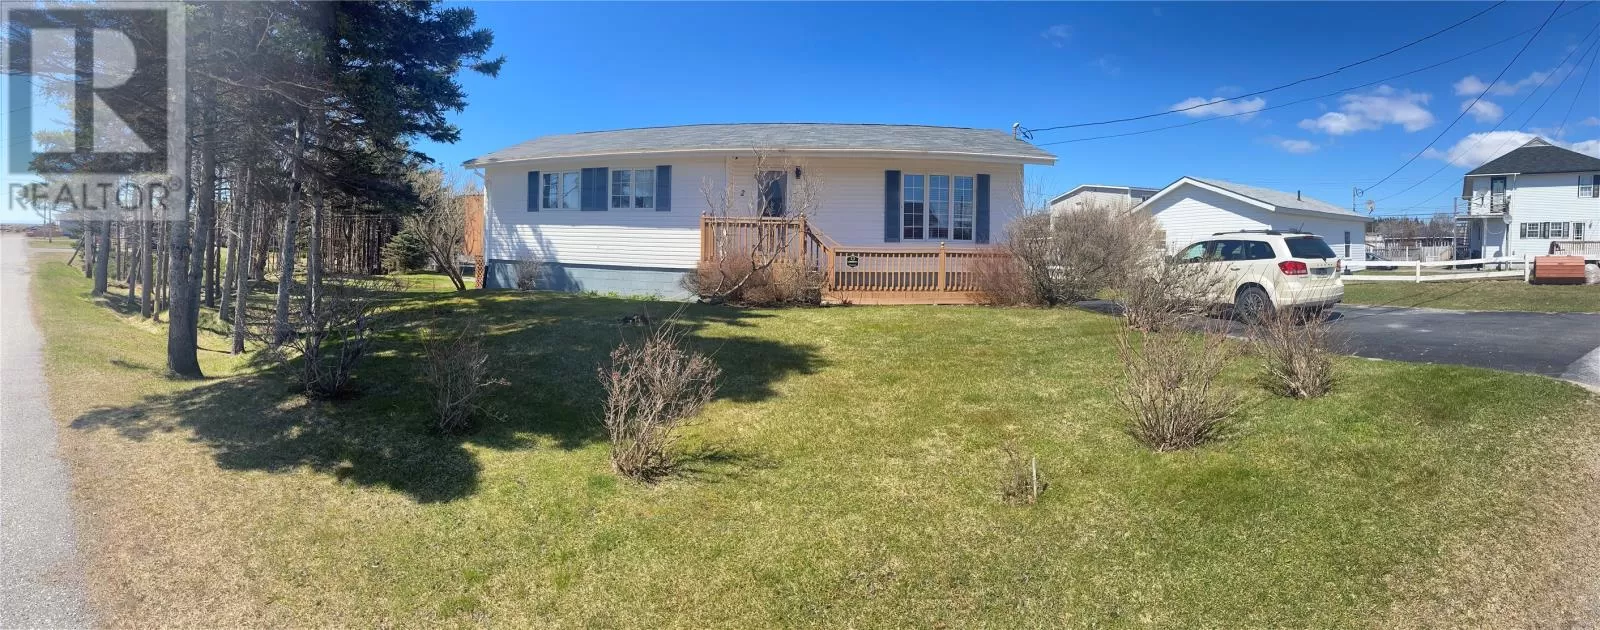 House for rent: 2 Bayview Street, Stephenville Crossing, Newfoundland & Labrador A0N 2C0